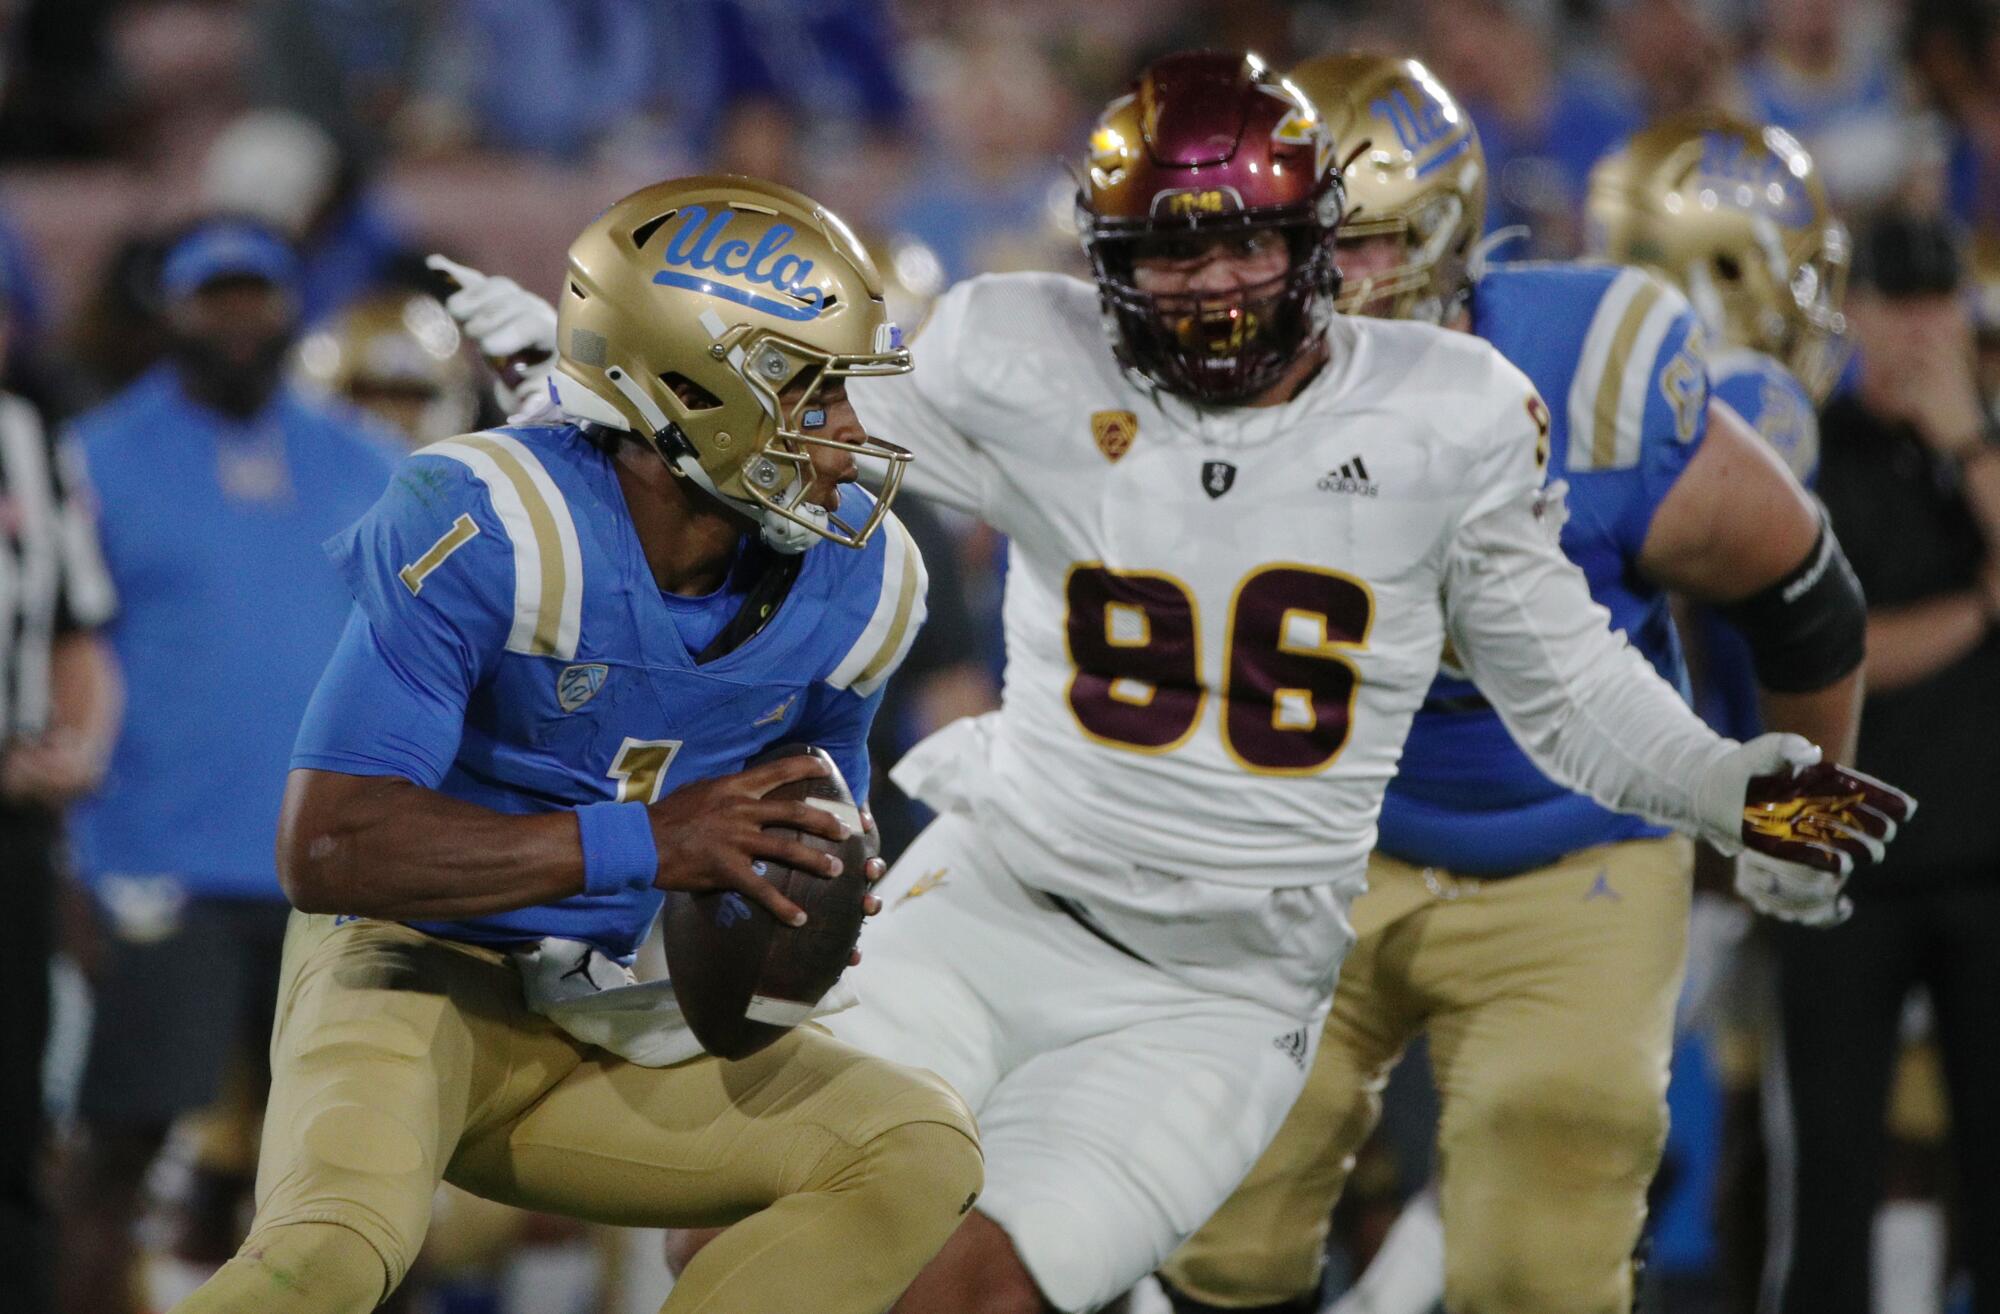 UCLA quarterback Dorian Thompson-Robinson scrambles out of the pocket in the first half against Arizona State.